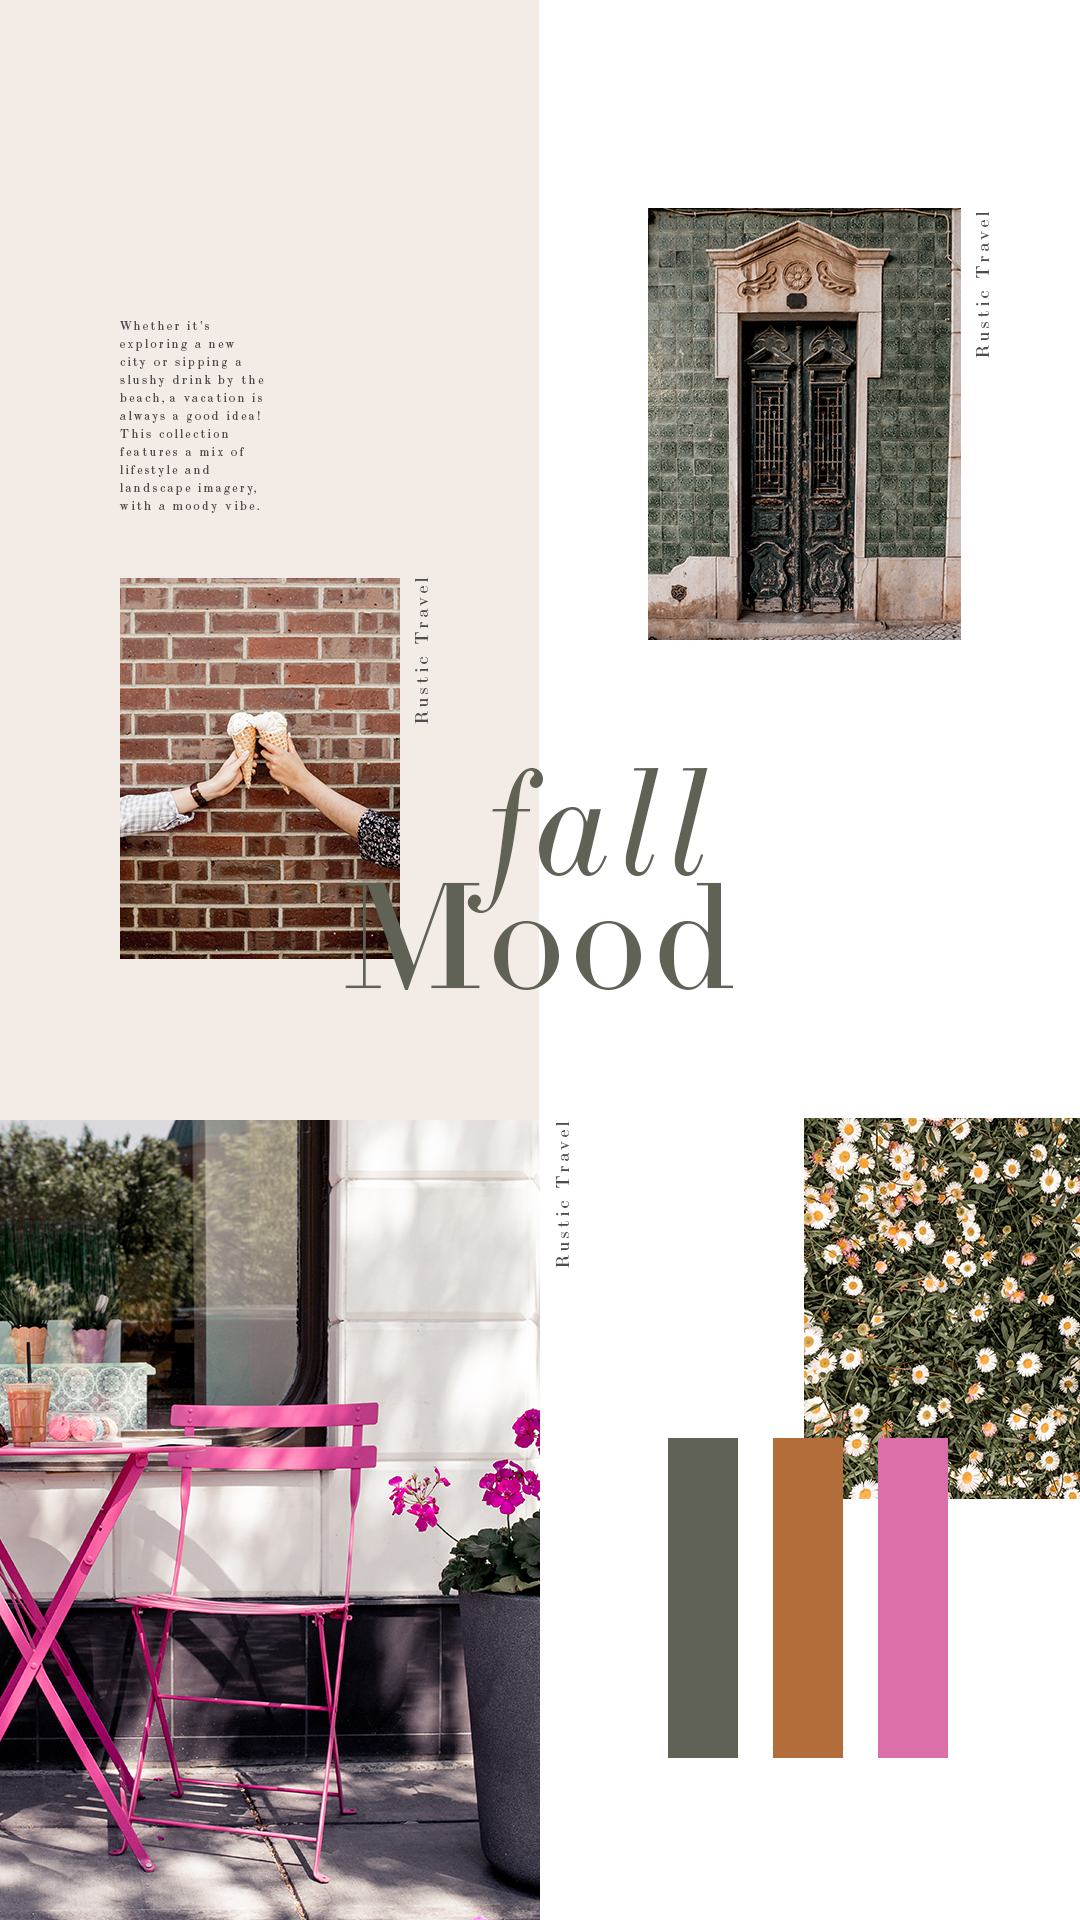 Olive green, burnt orange, and hot pink make a unique combination for a new spin on a fall color palette.